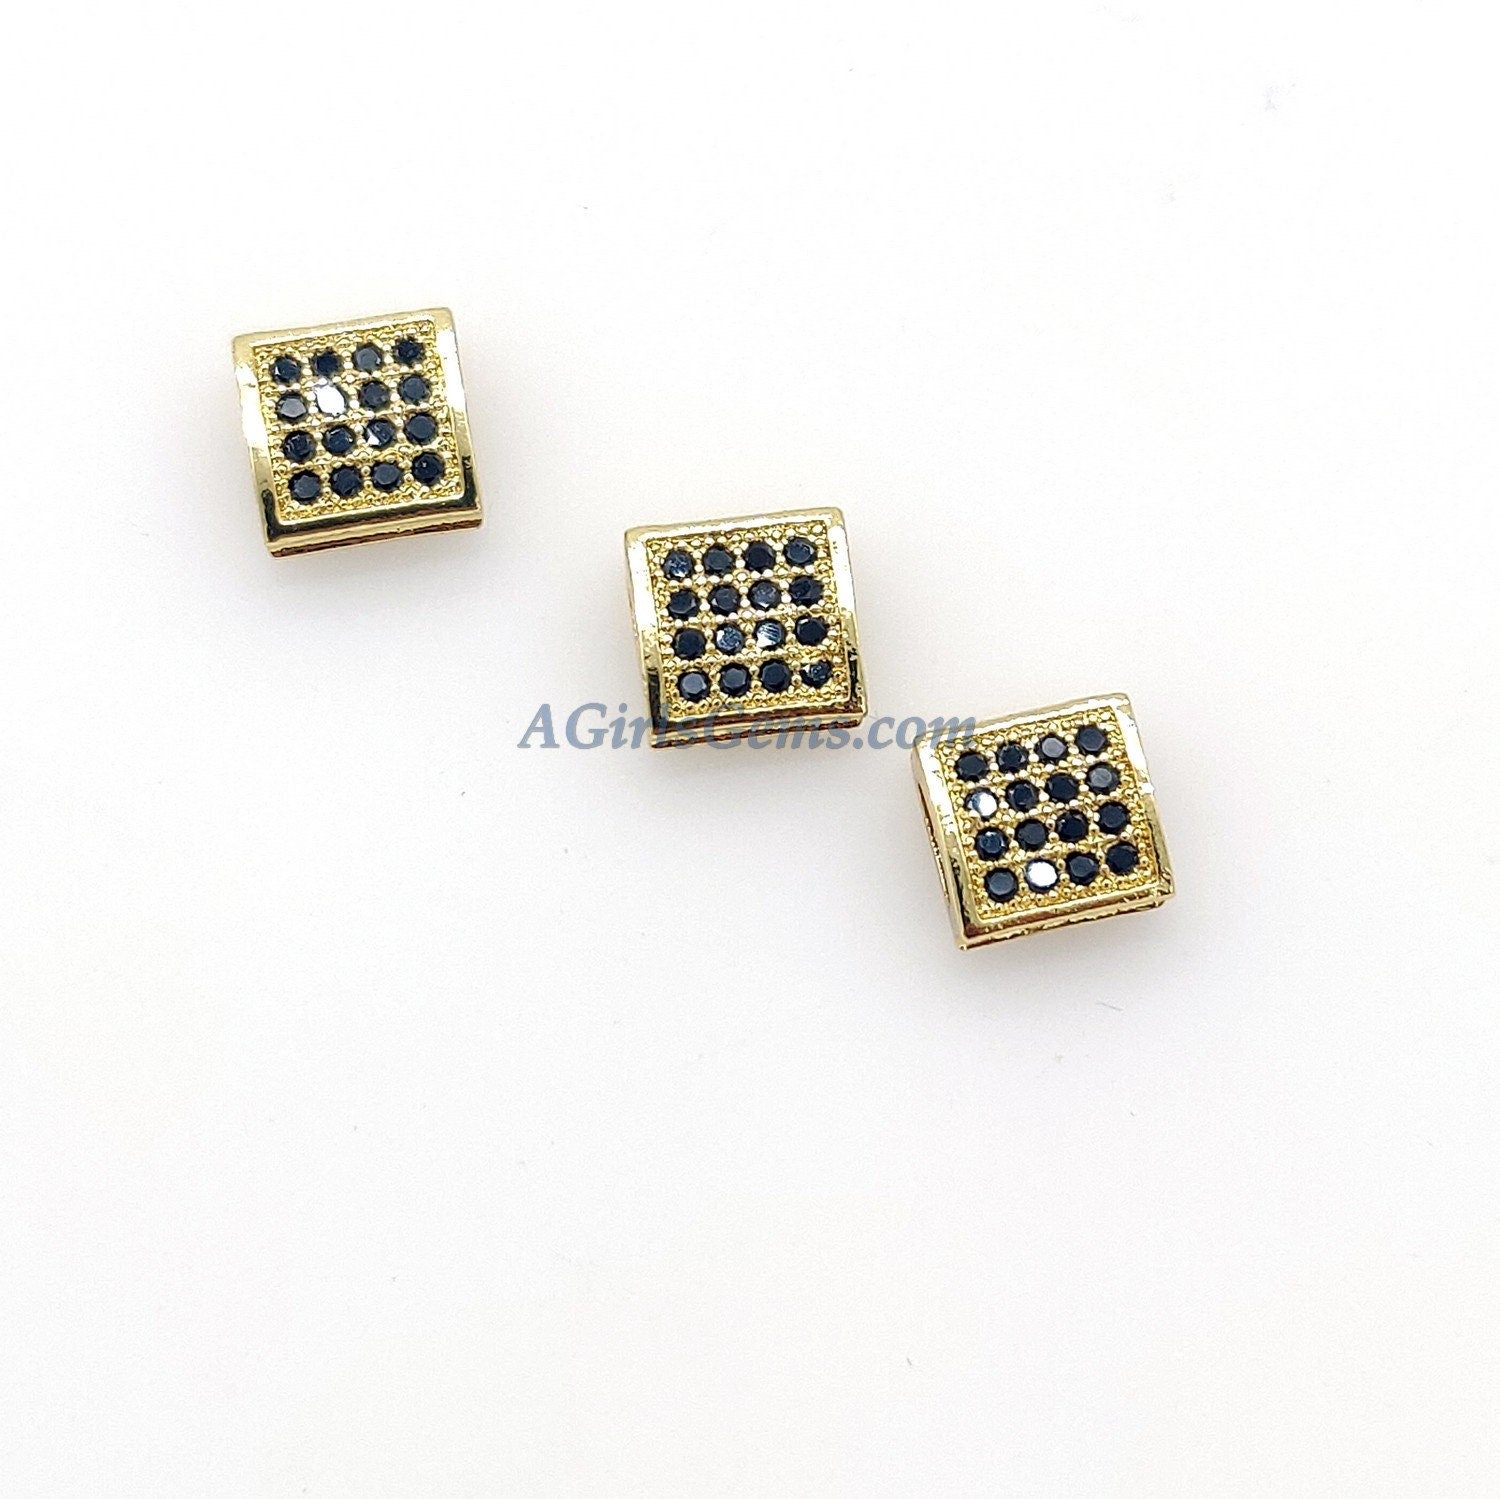 CZ Micro Pave Bead Cube Beads, Flat Square Beads, Rose Gold/Gold/Silver Big Hole Spacers